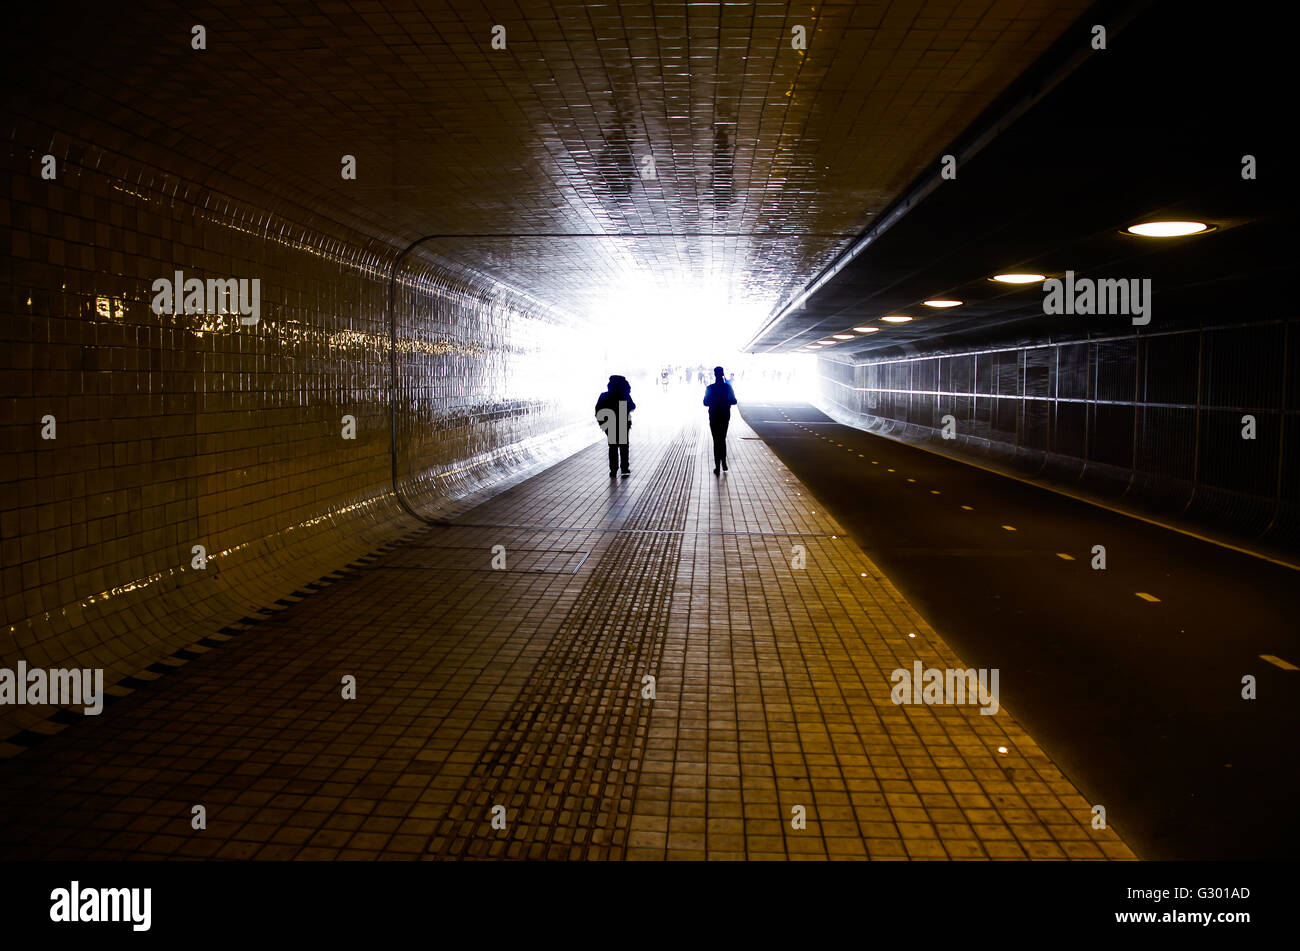 Two shadows walking in a dark empty tunnel towards bright light (Amsterdam train station tunnel, 2016) Stock Photo